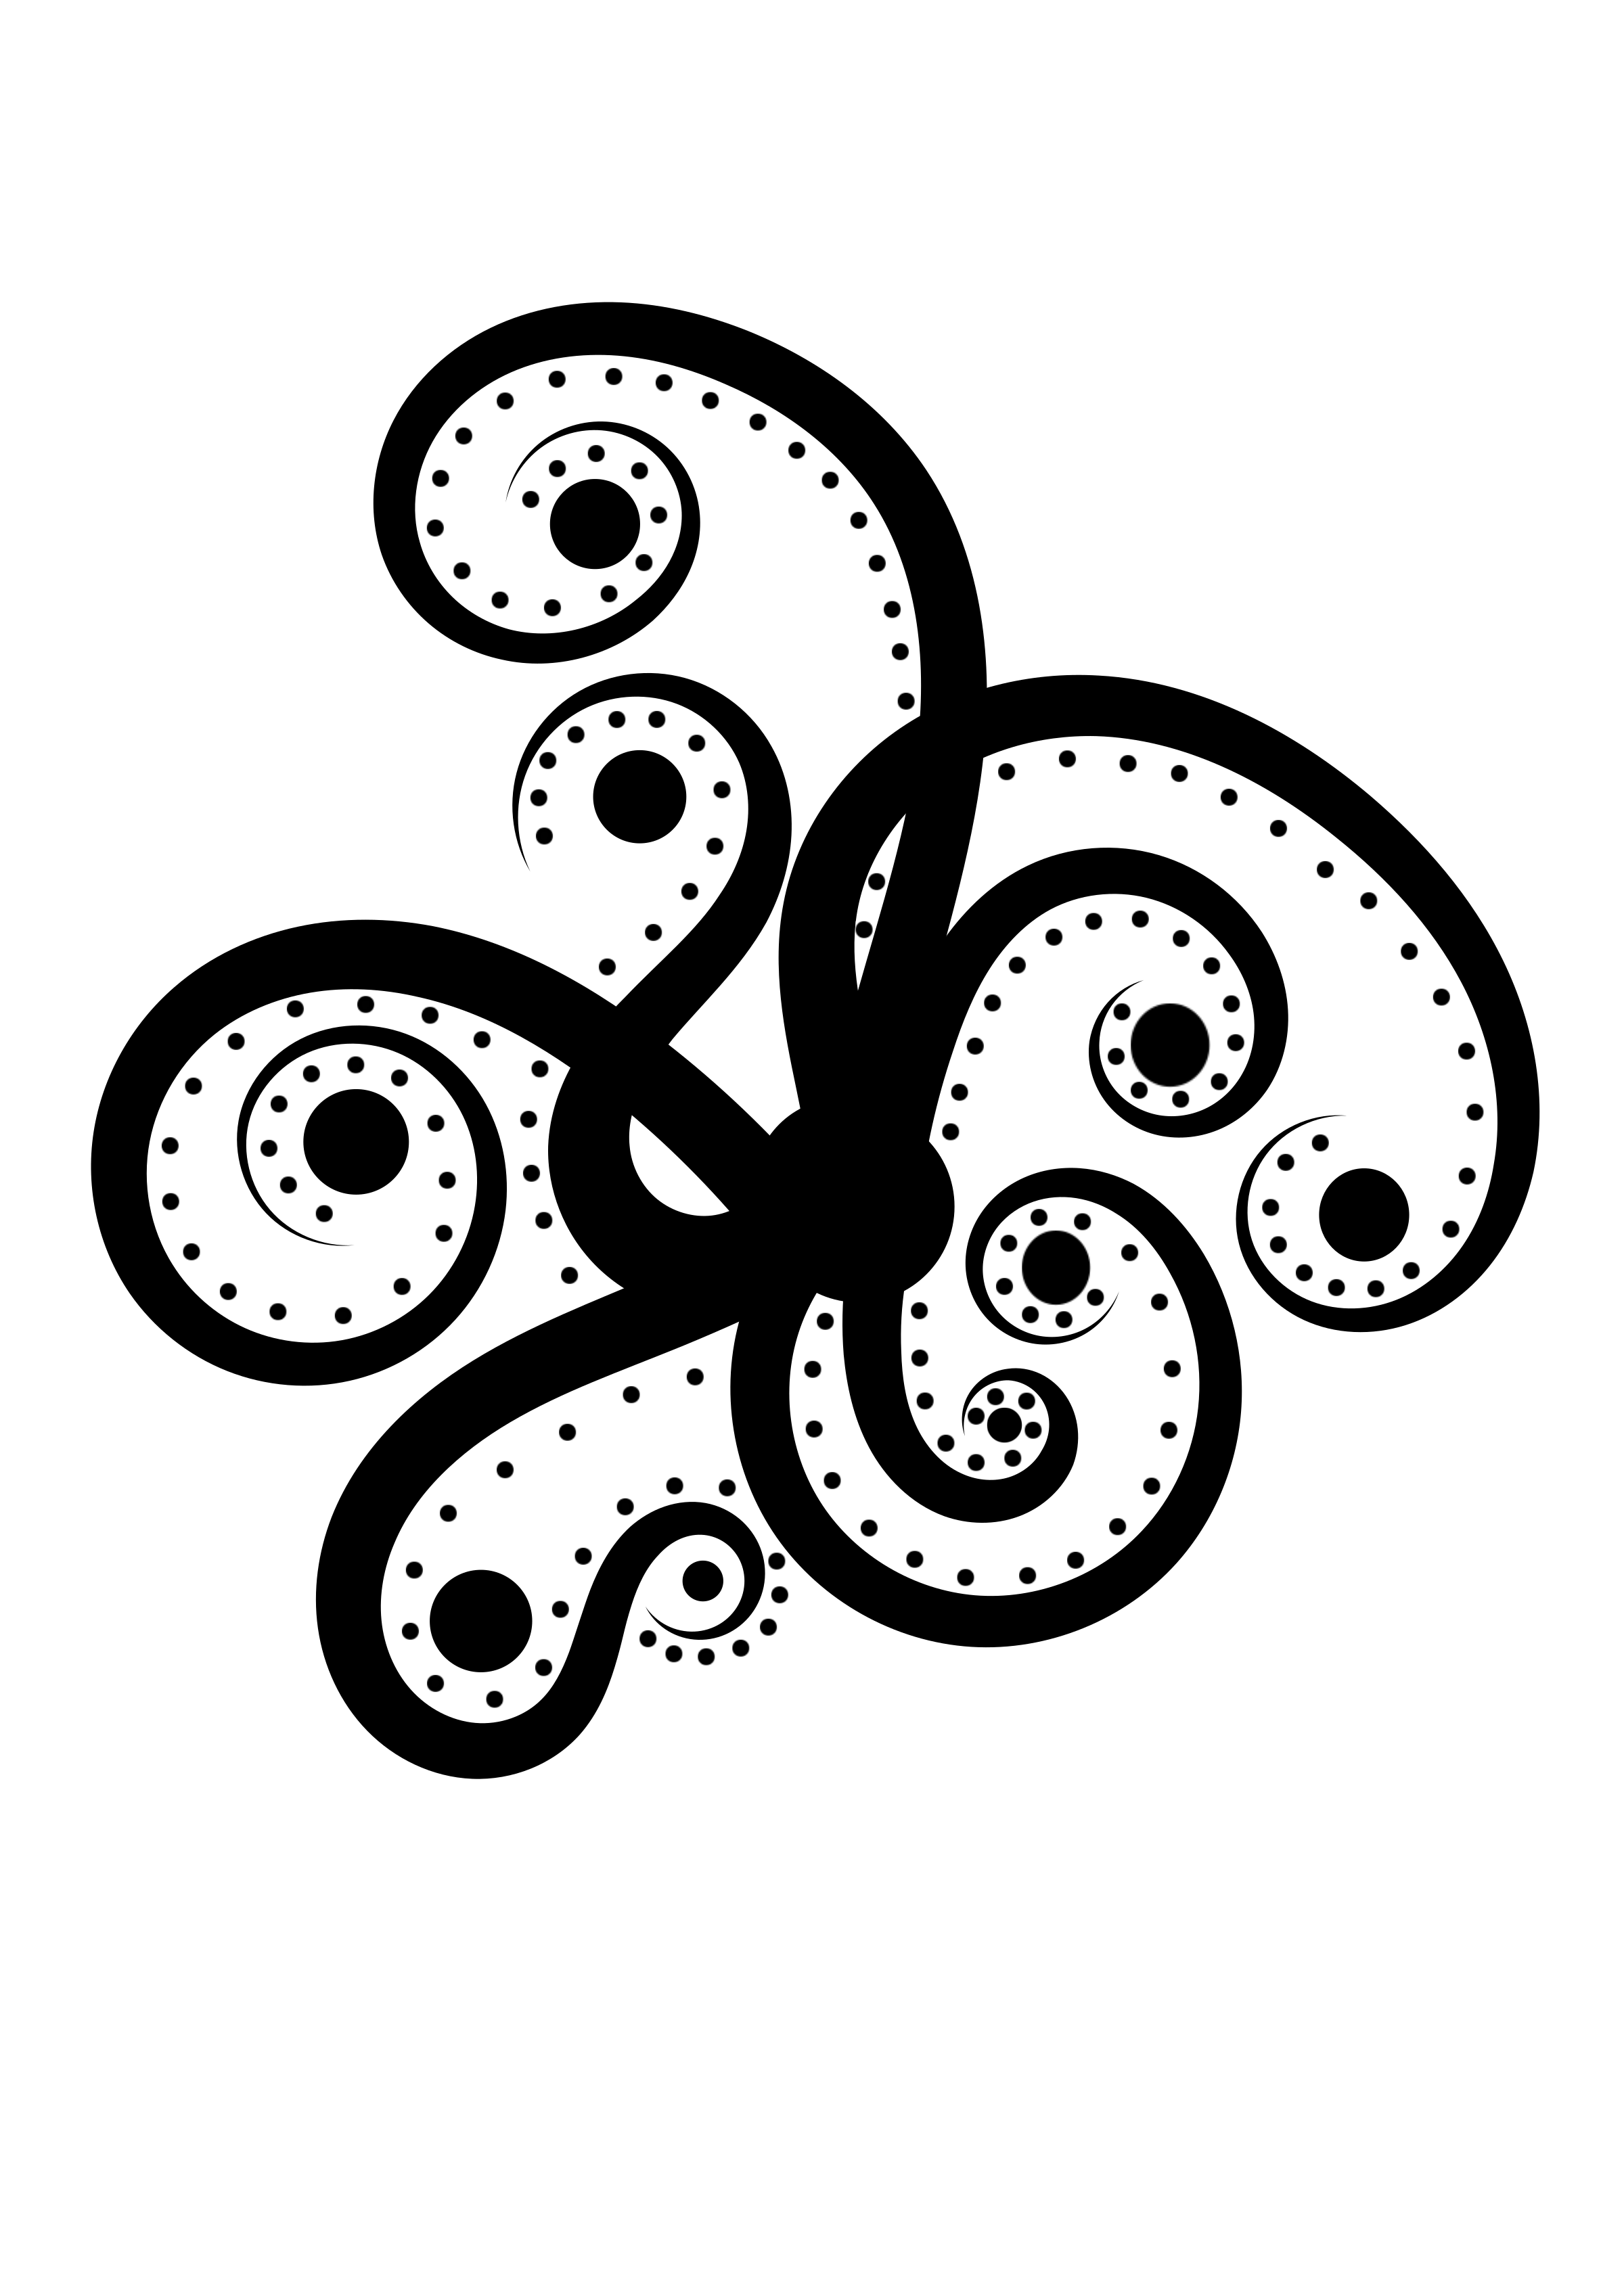 Bw abstract octopus by. Greek clipart reef